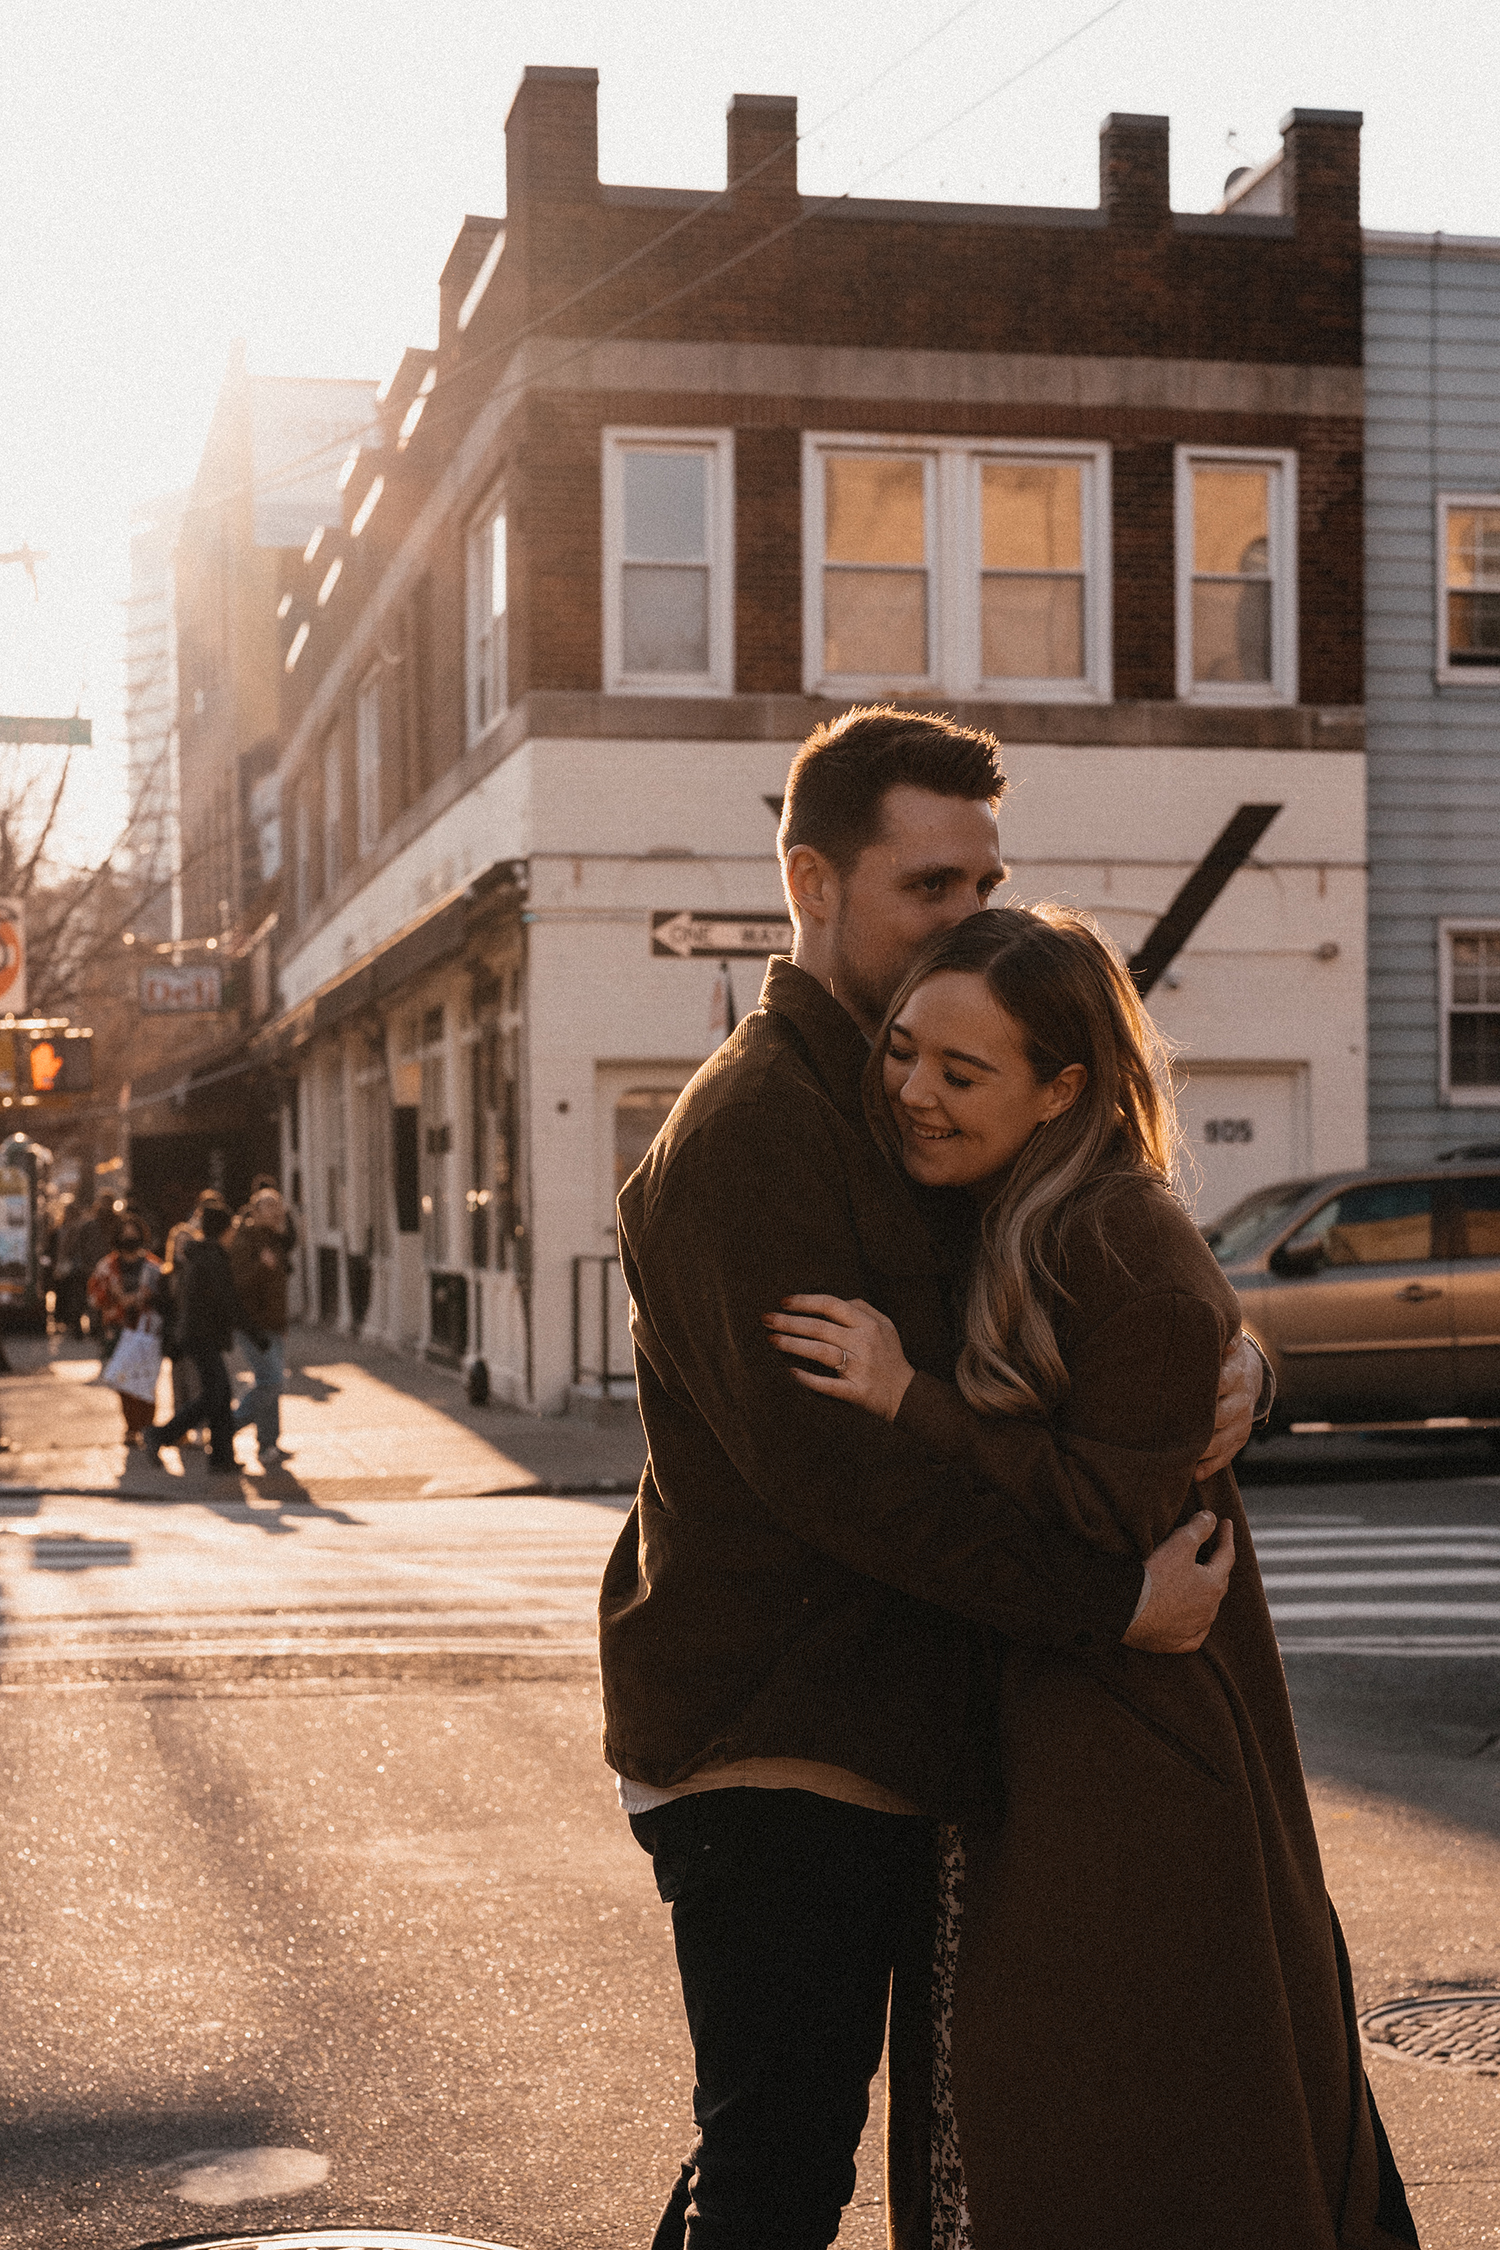 Warm and cuddly engagement photoshoot in Williamsburg.